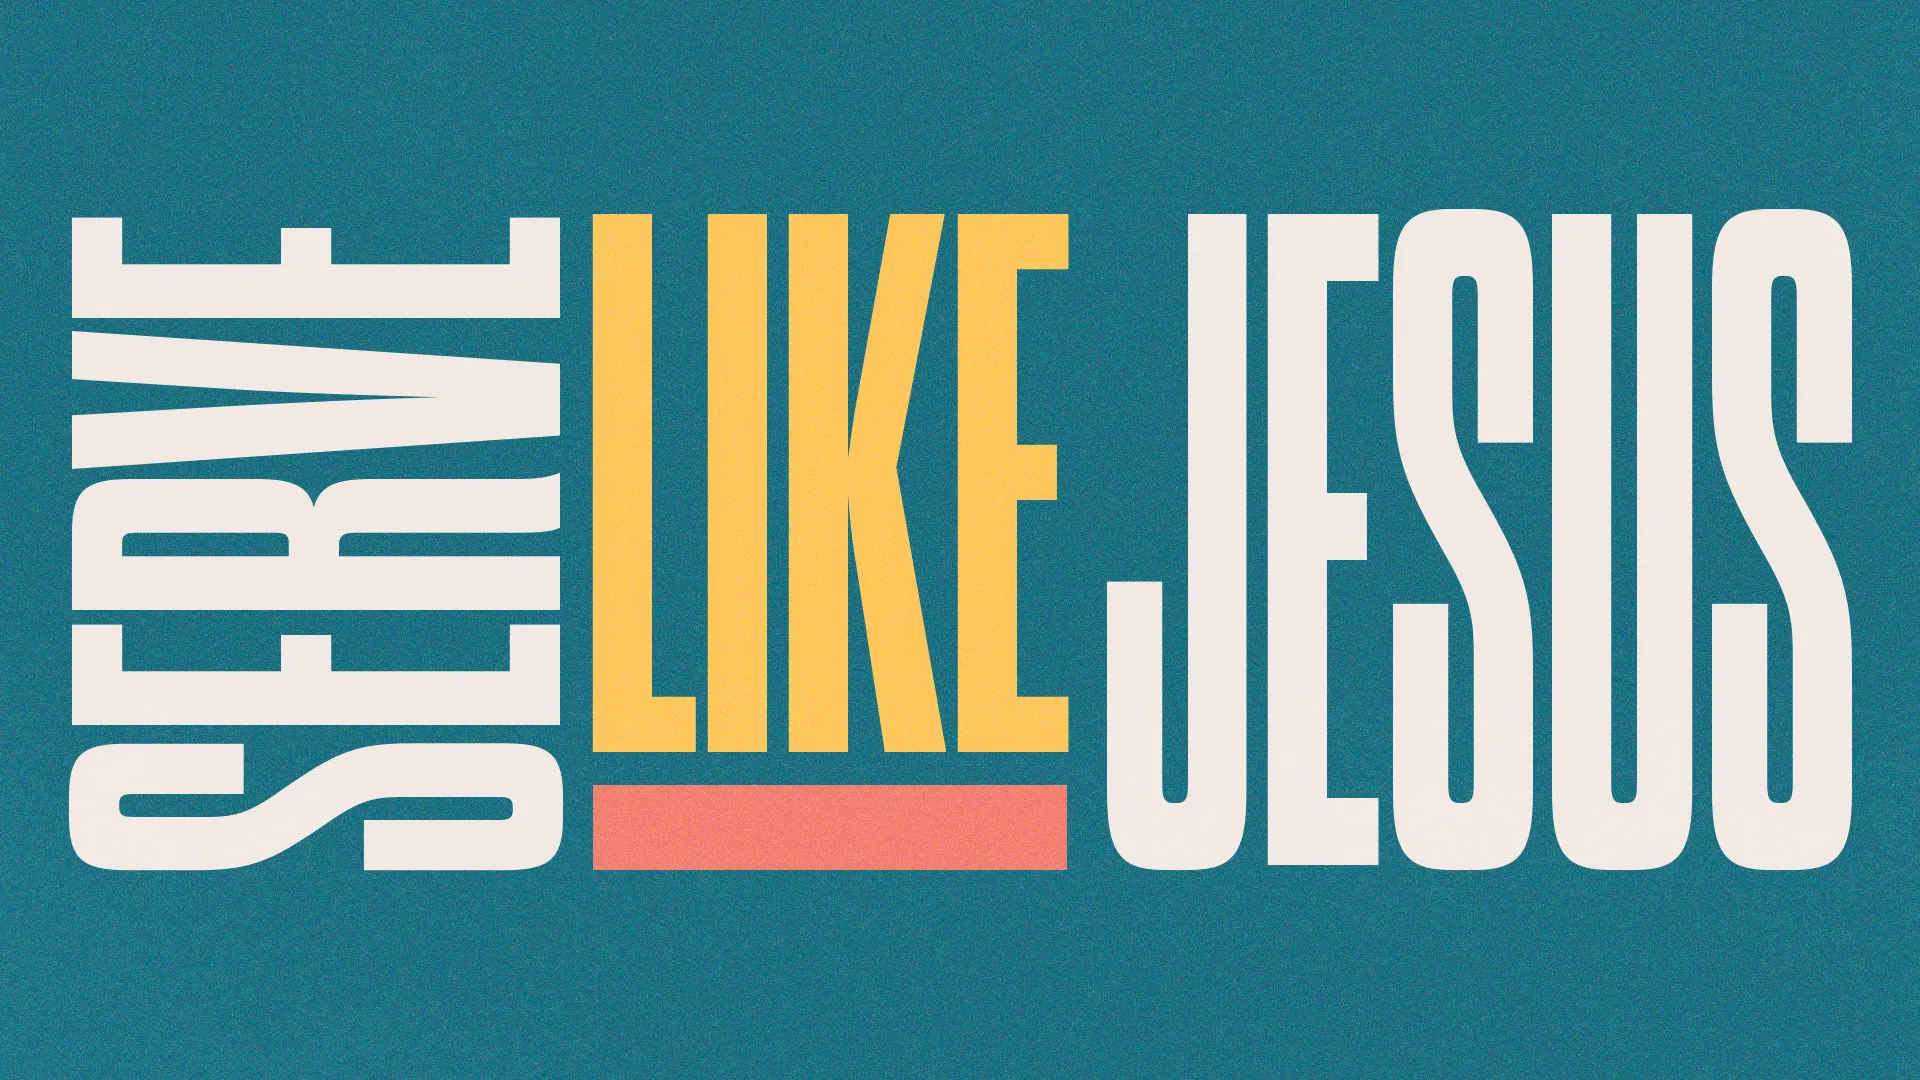 Inspire Action And Service Within Your Congregation With This 'Serve Like Jesus' Graphic, A Vibrant And Compelling Visual That Underscores The Christian Call To Servanthood And Humility.